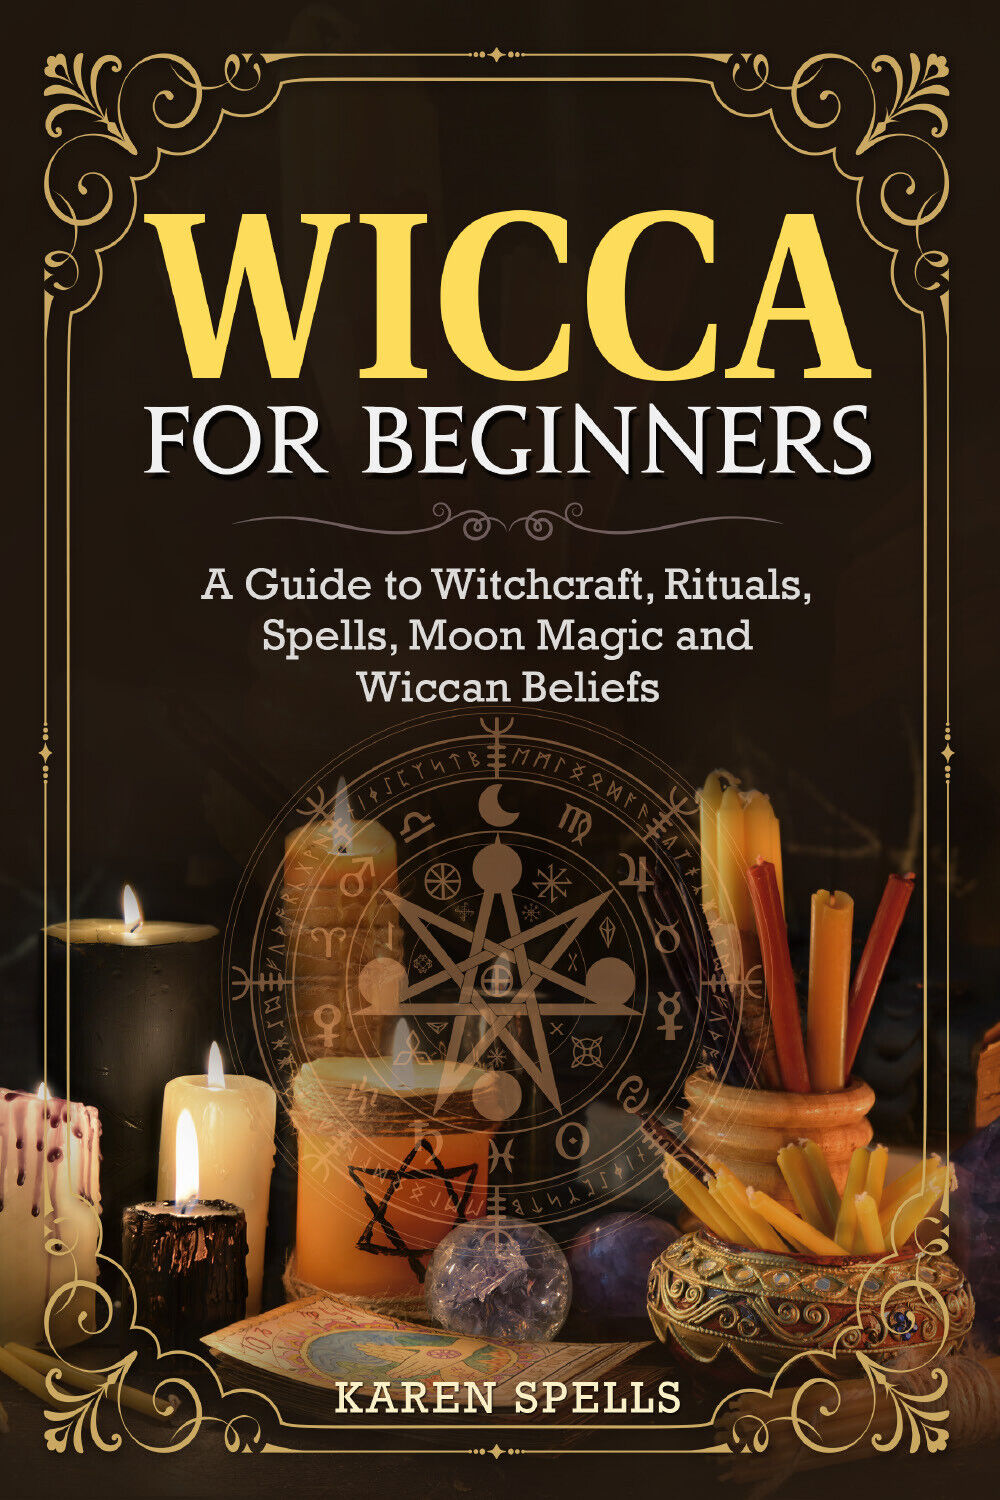 Wicca for Beginners. A Guide to Witchcraft, Rituals, Spells, Moon Magic and Wicc libro usato